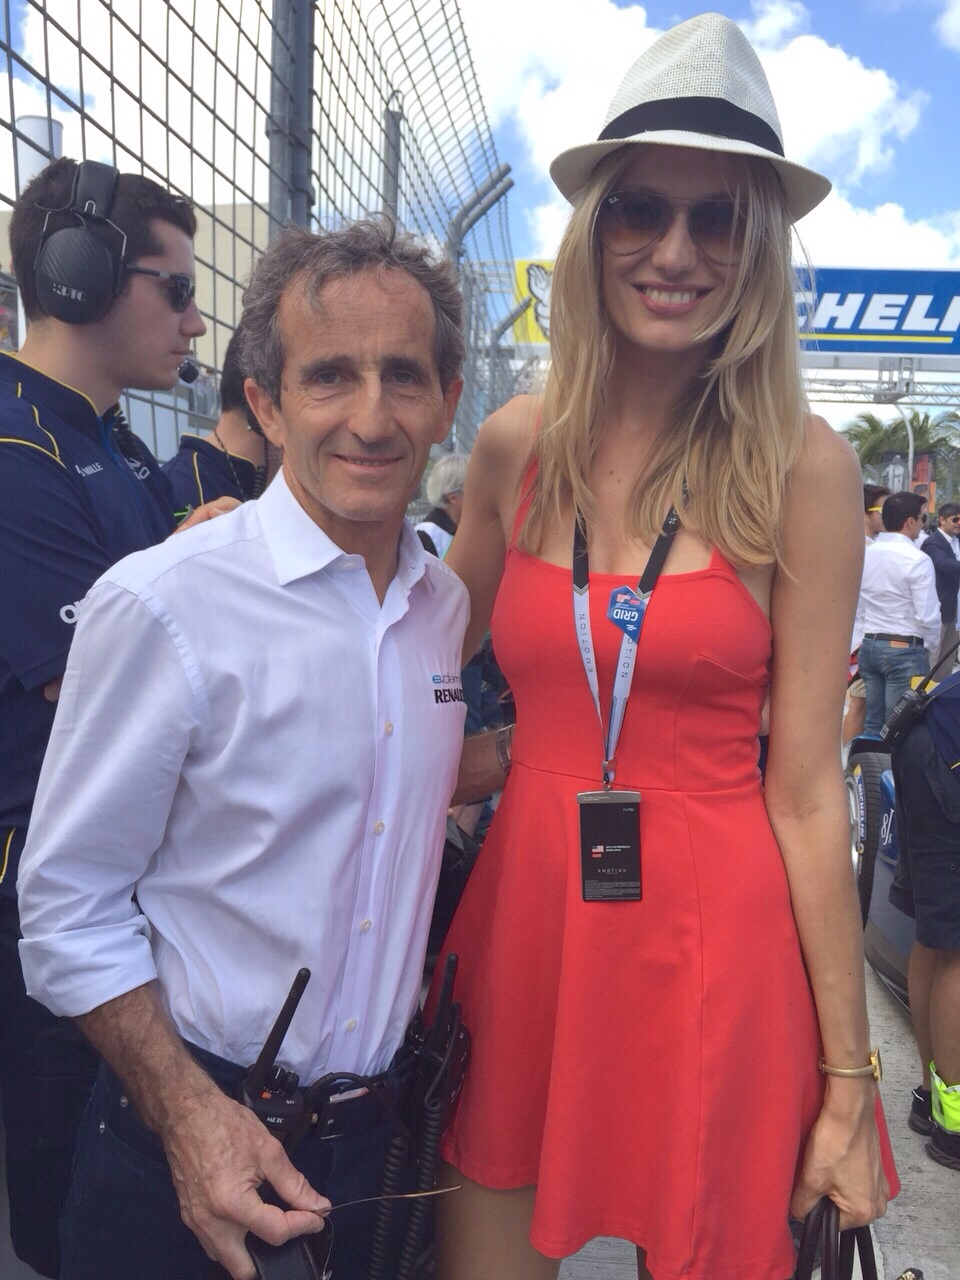 Do you remember him on the circuit? Amazing Alan Prost.